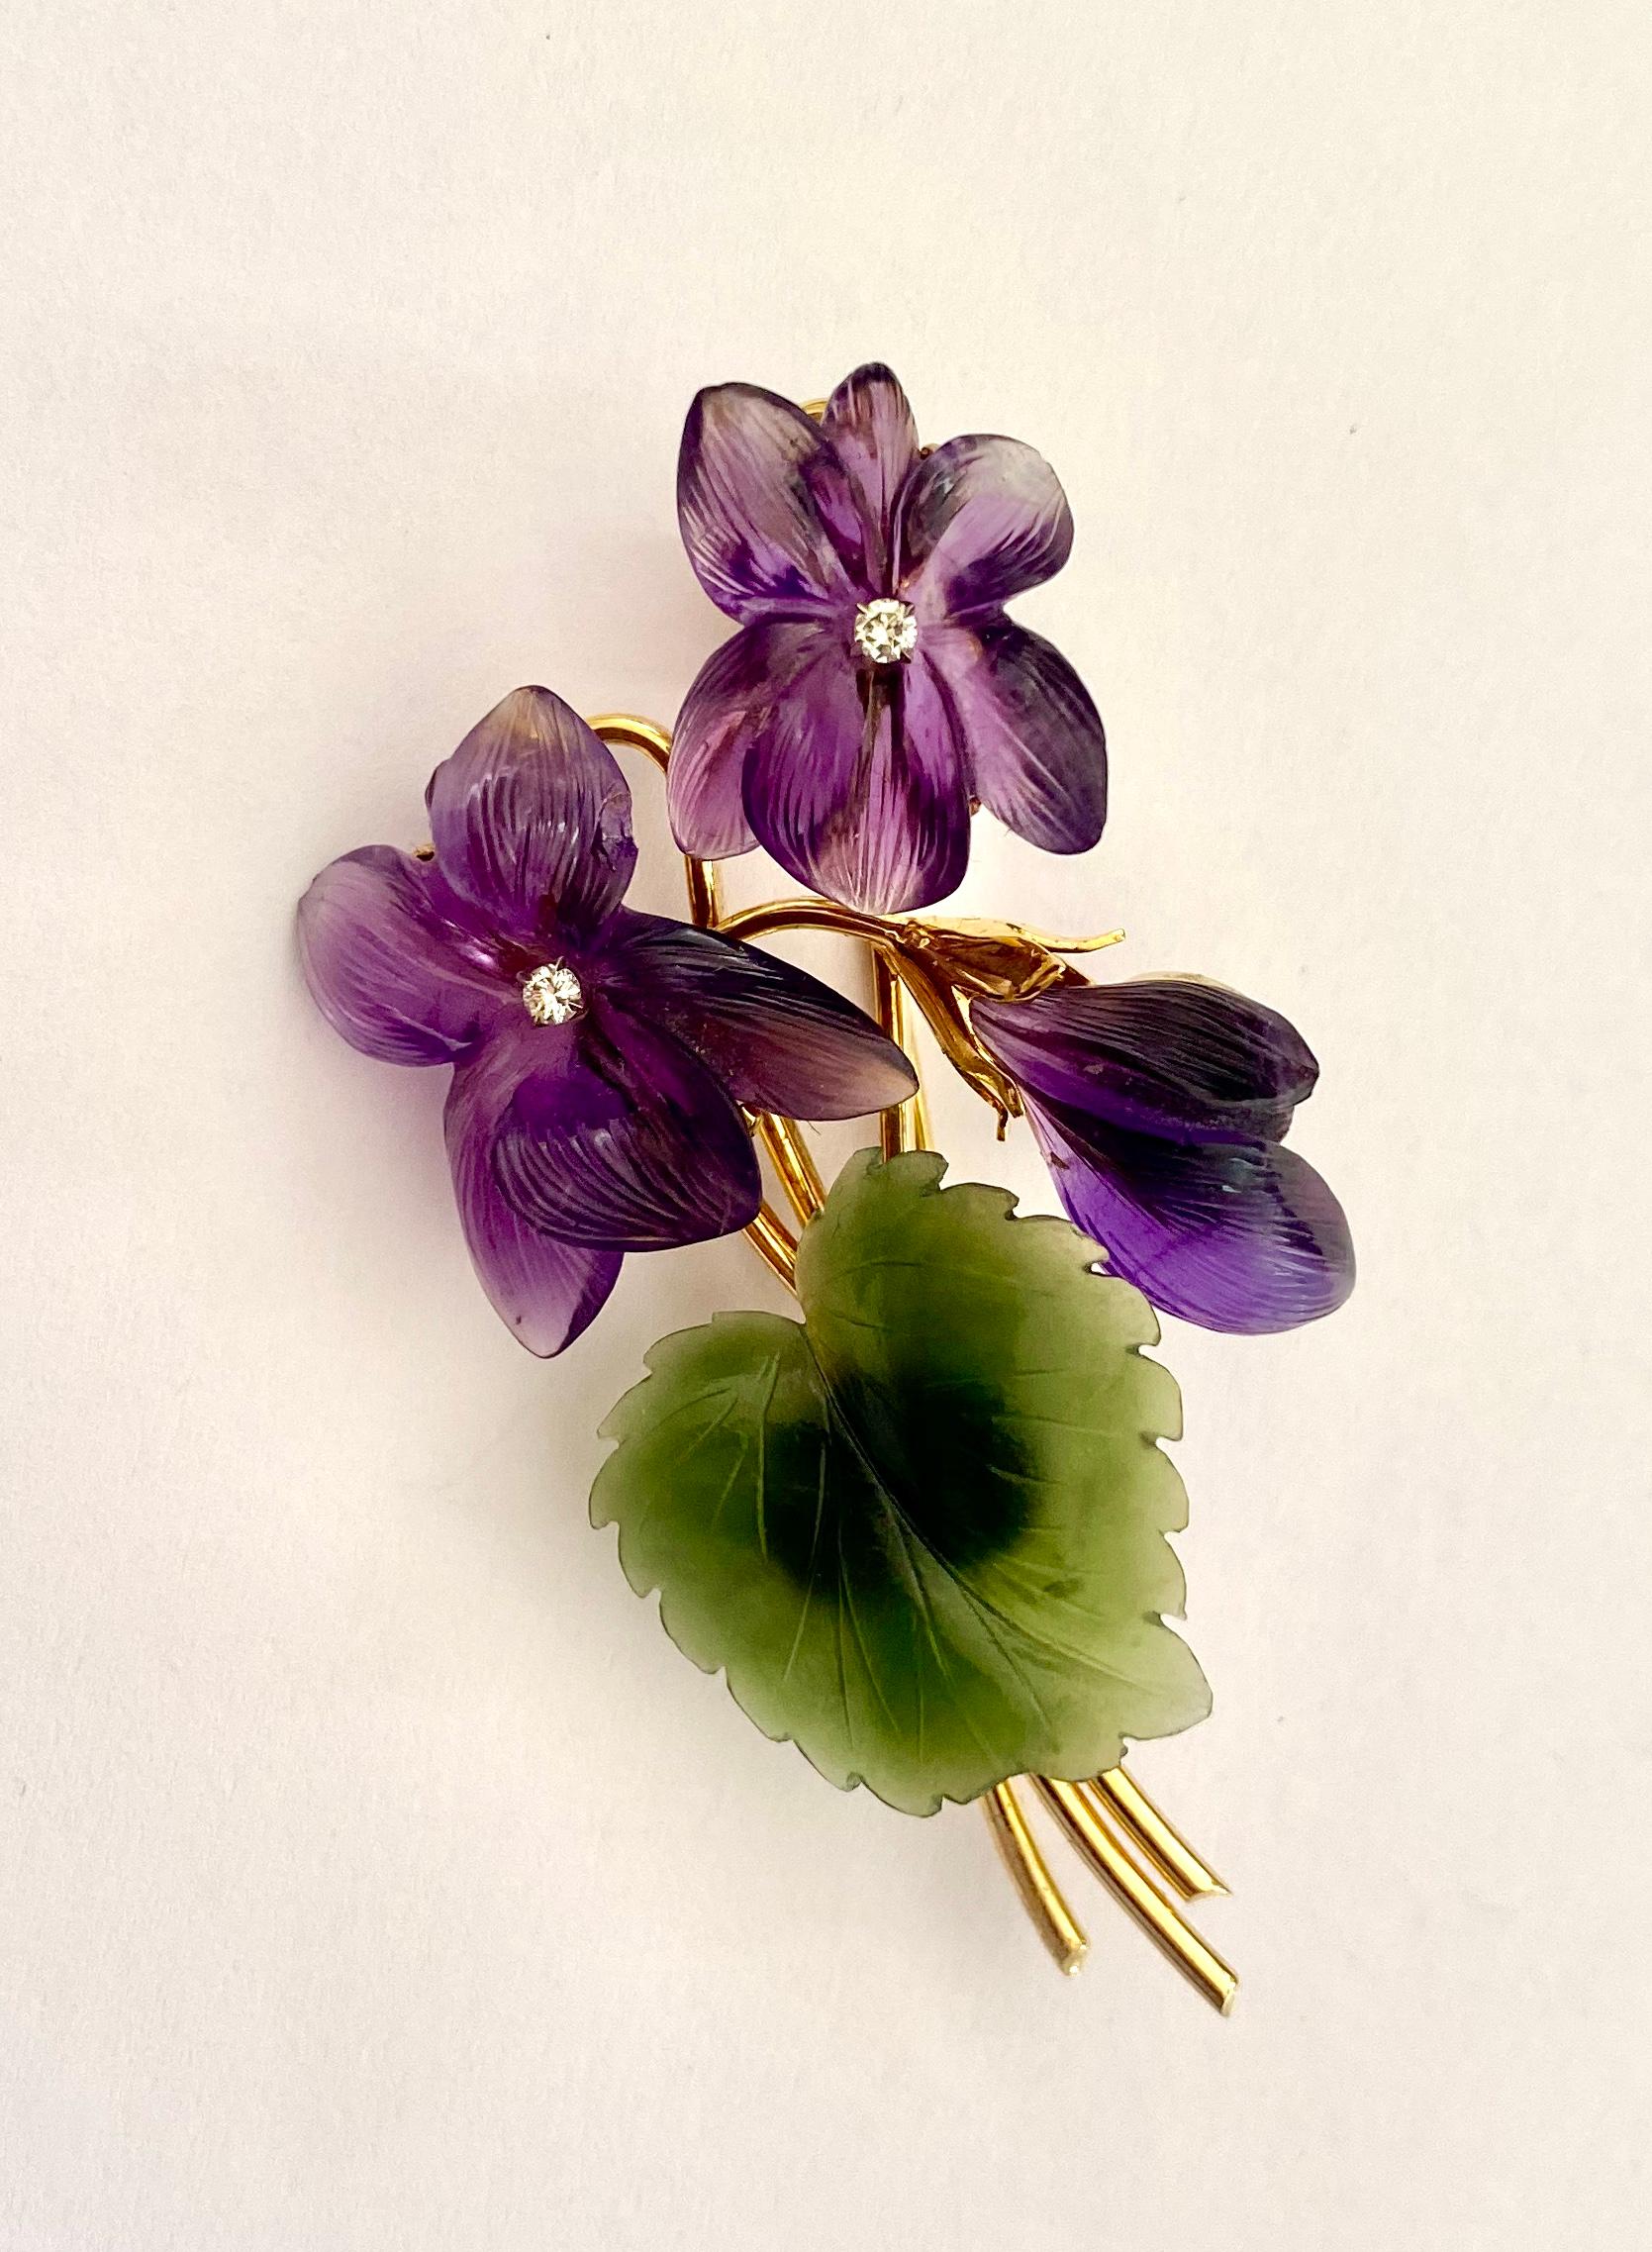 One (1) 18K. Yellow Gold Flower Bouquet Brooch,  Vienna 1960
set with:
Natural Nephrite (Jadiet) Green   (1x)
Natural Amethist (Quartz) Purple  (3x)
Natural Diamond (0.05ct) VS/SI I-J  (2x)
stamped  750 (incl. Dutch Garantee stamp) and A.S = Armold